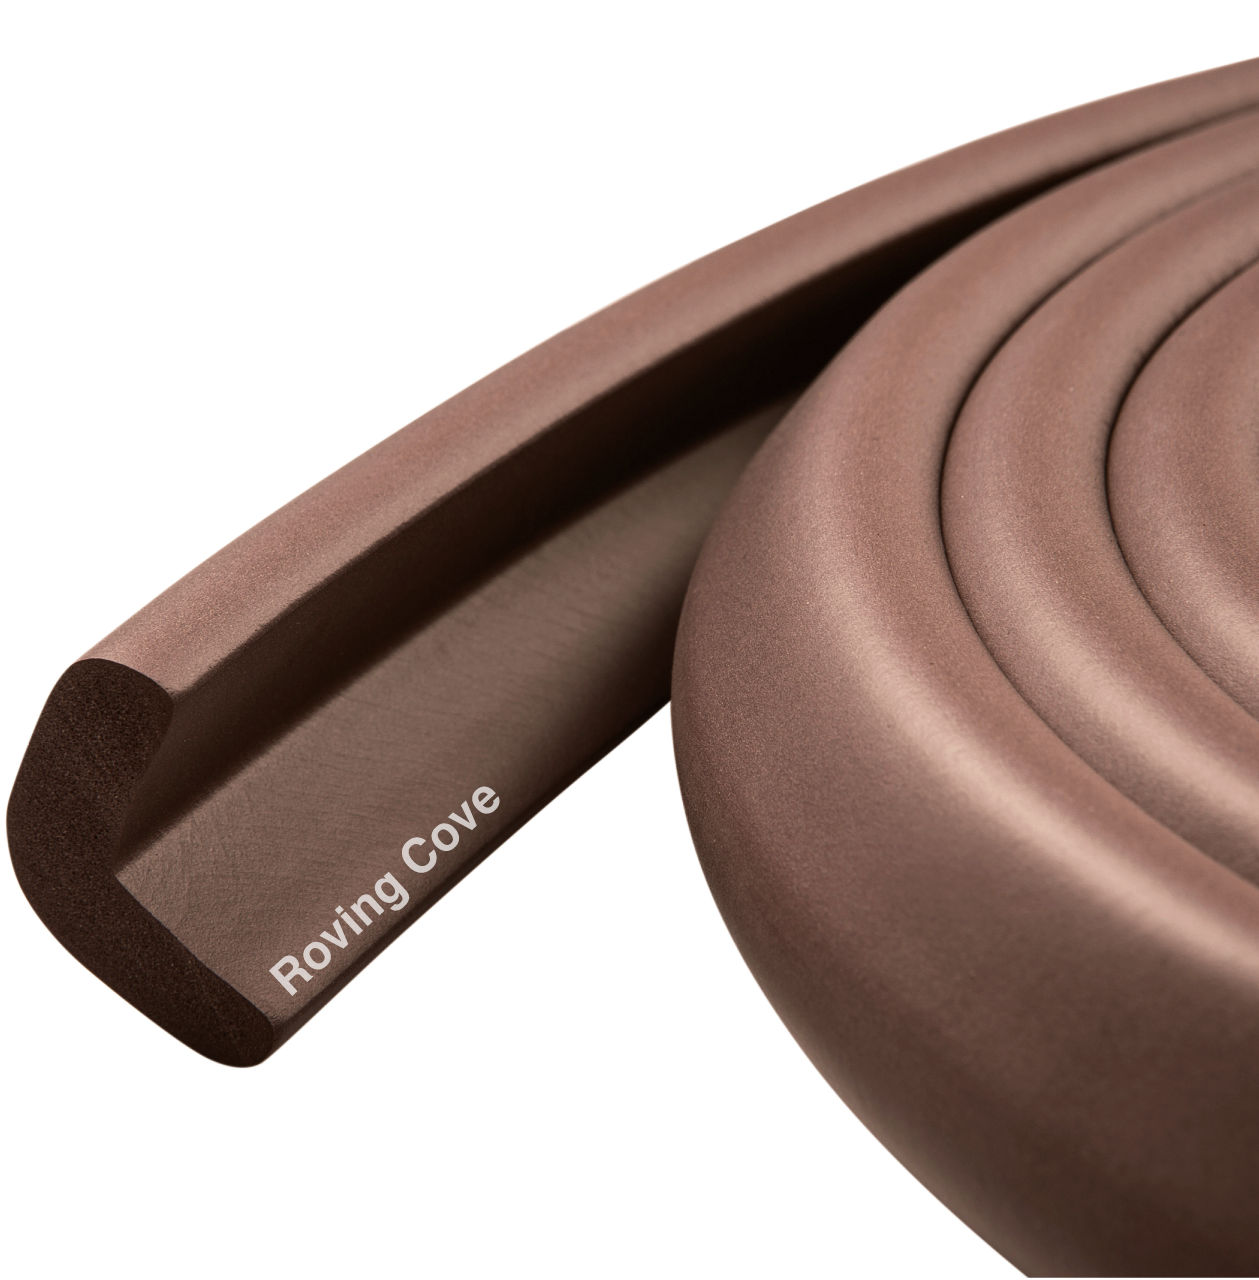 Roving Cove HeftyFit Edge and Corner Protectors for Baby Proofing, Large  15ft Edge + 4 Corners, Coffee Brown